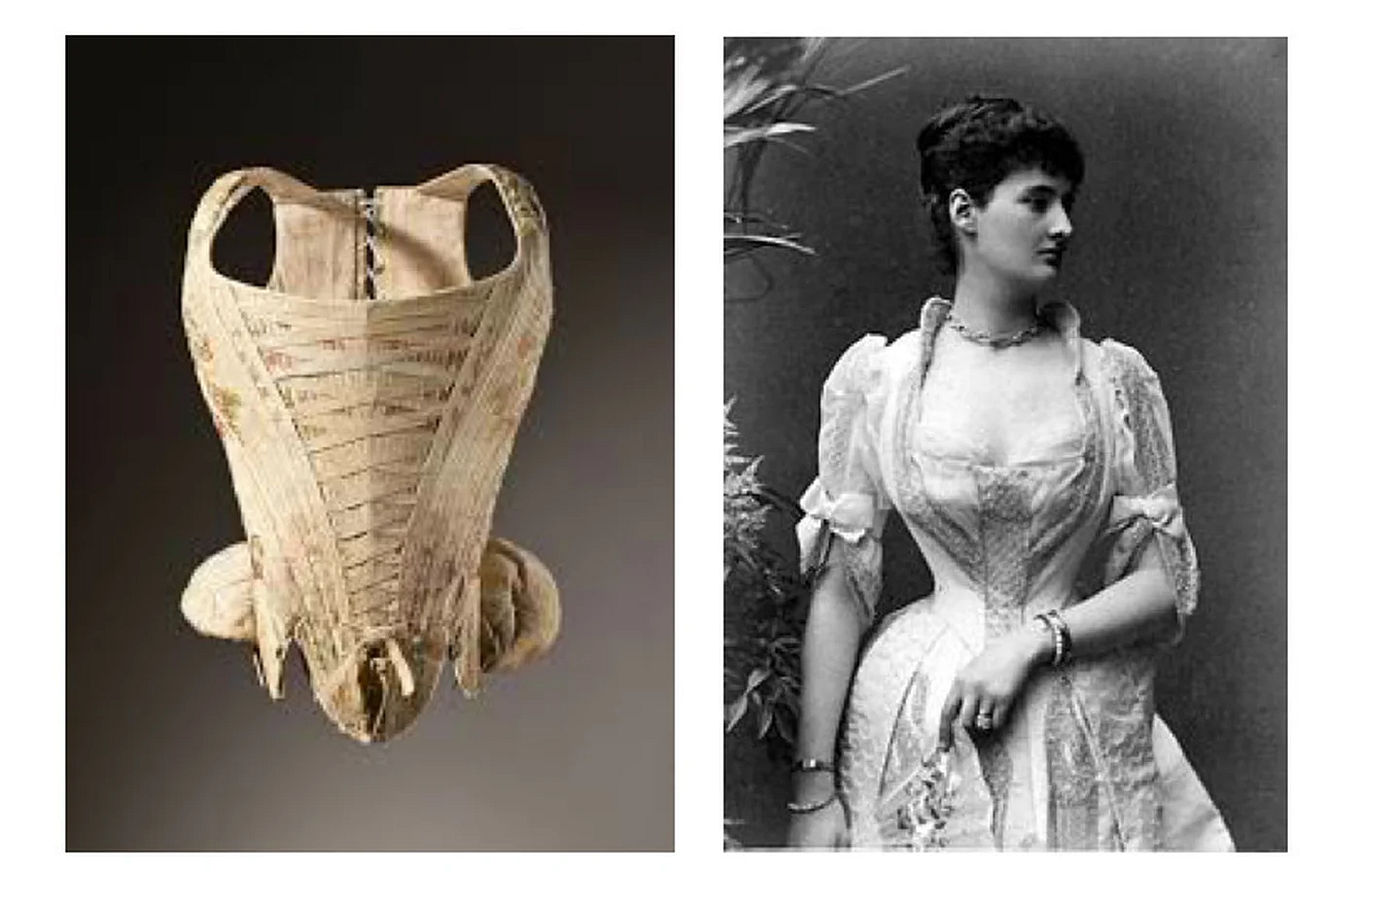 How 8 Different Historical Corsets Affect the Same Plus Size Body 